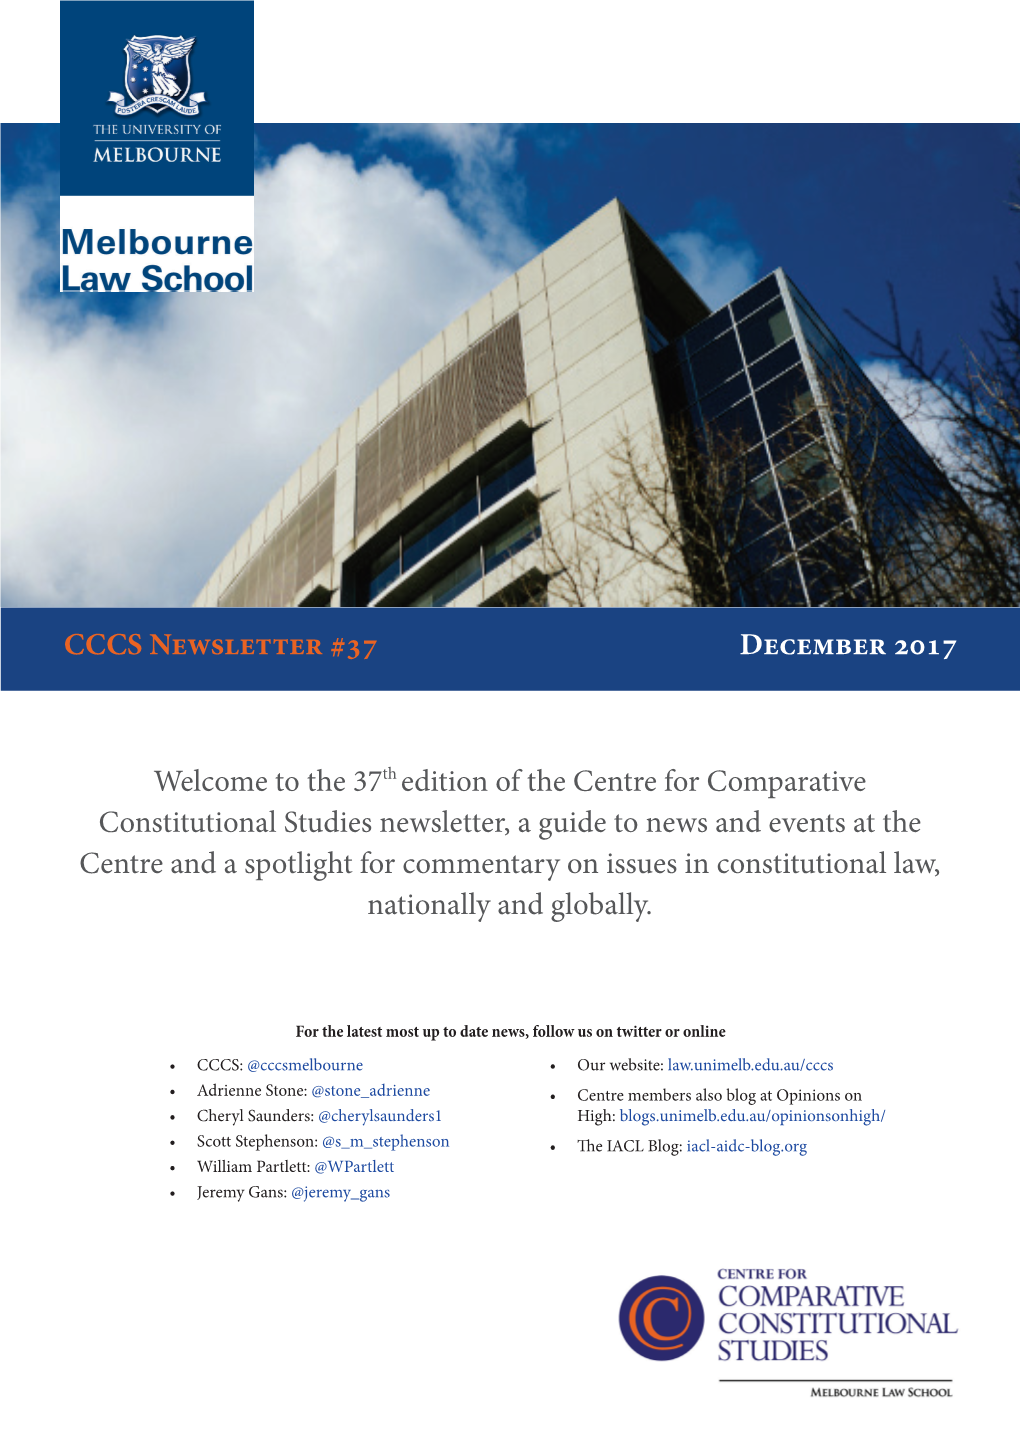 CCCS Newsletter #37 December 2017 Welcome to the 37Th Edition of the Centre for Comparative Constitutional Studies Newsletter, A